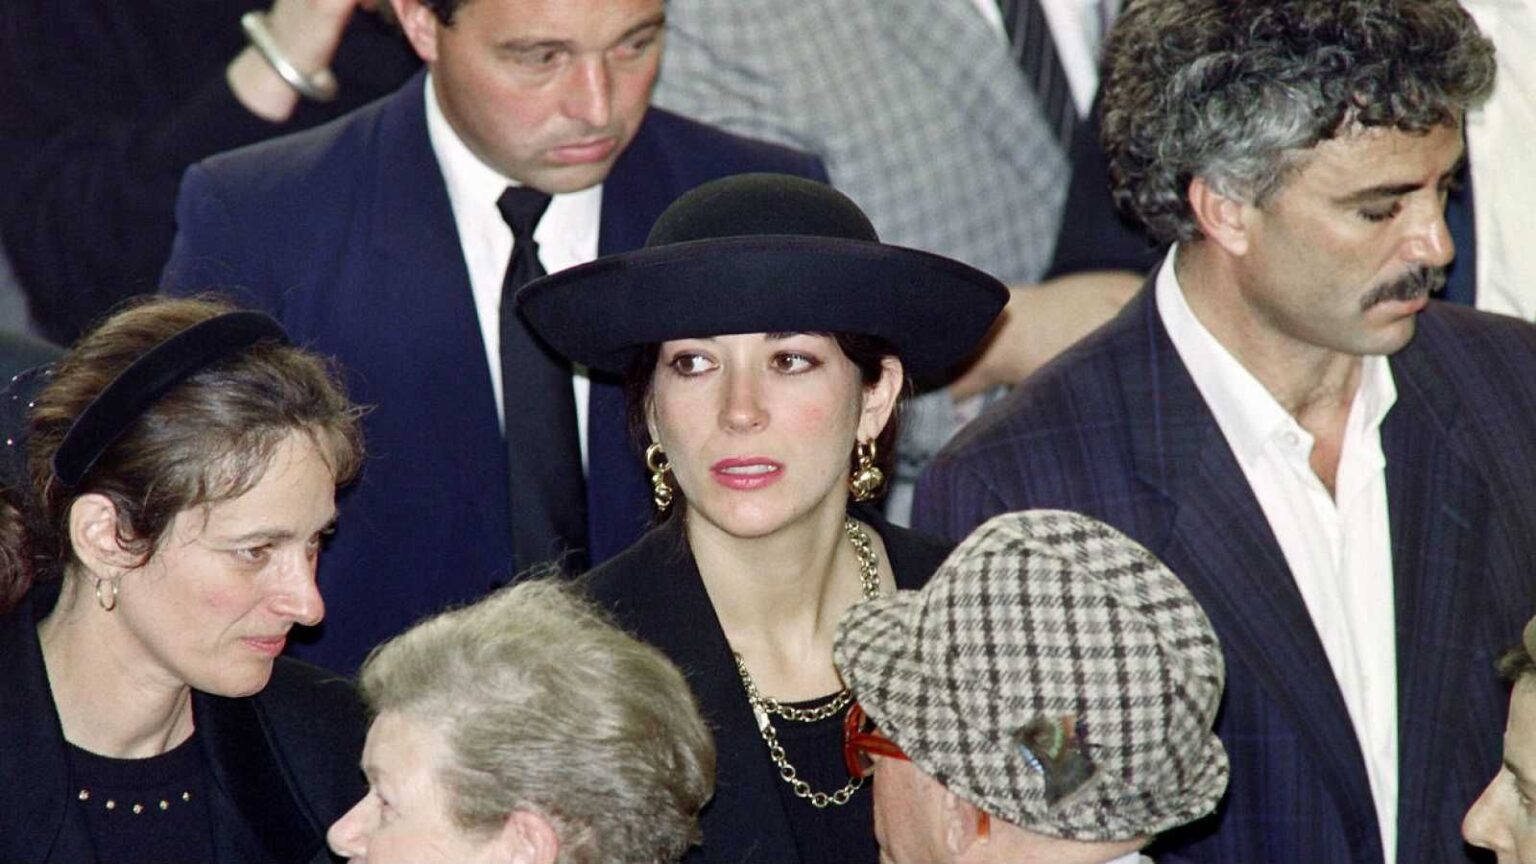 Victims allege that Ghislaine Maxwell was both the madam cheif to Jeffrey Epstein and the chief of the whole sex trafficking ring. Could this be possible?